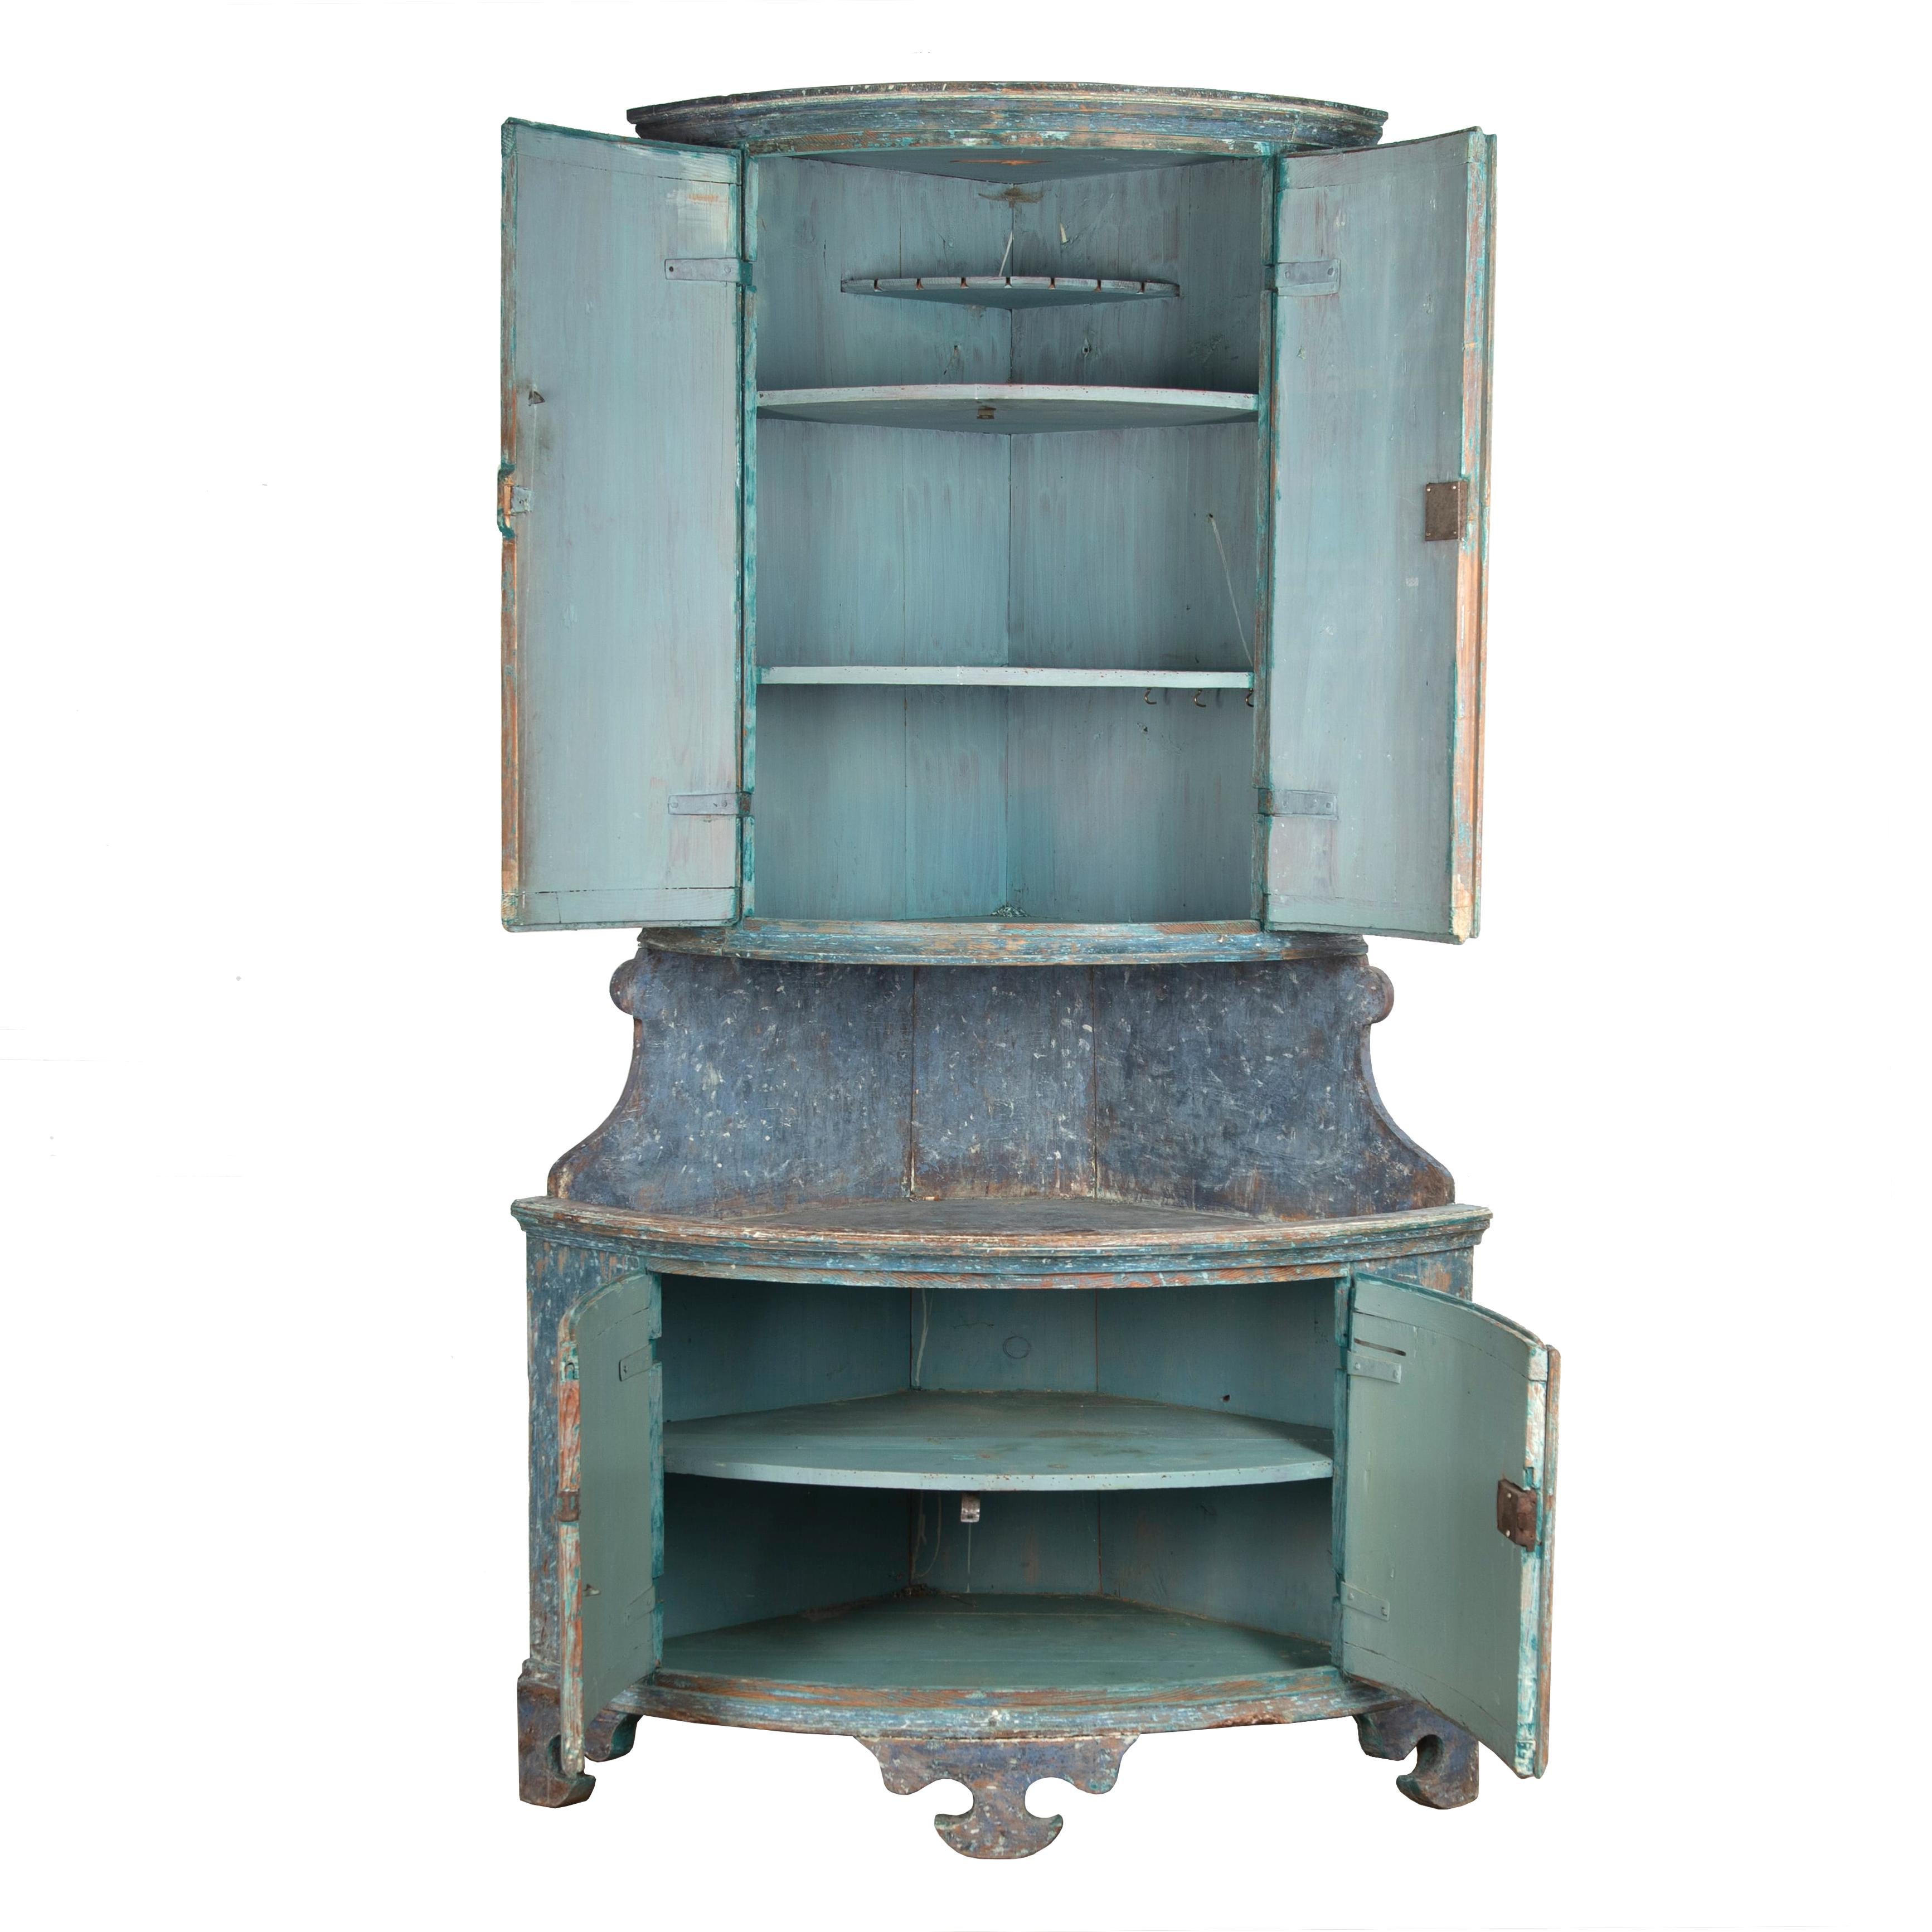 Exceptional 19th Century period Gustavian corner cabinet.
With a rounded top section, opening to useful storage shelves. Below are carved backboards and two further doors opening to further storage.
With original paint on the exterior, re-painted